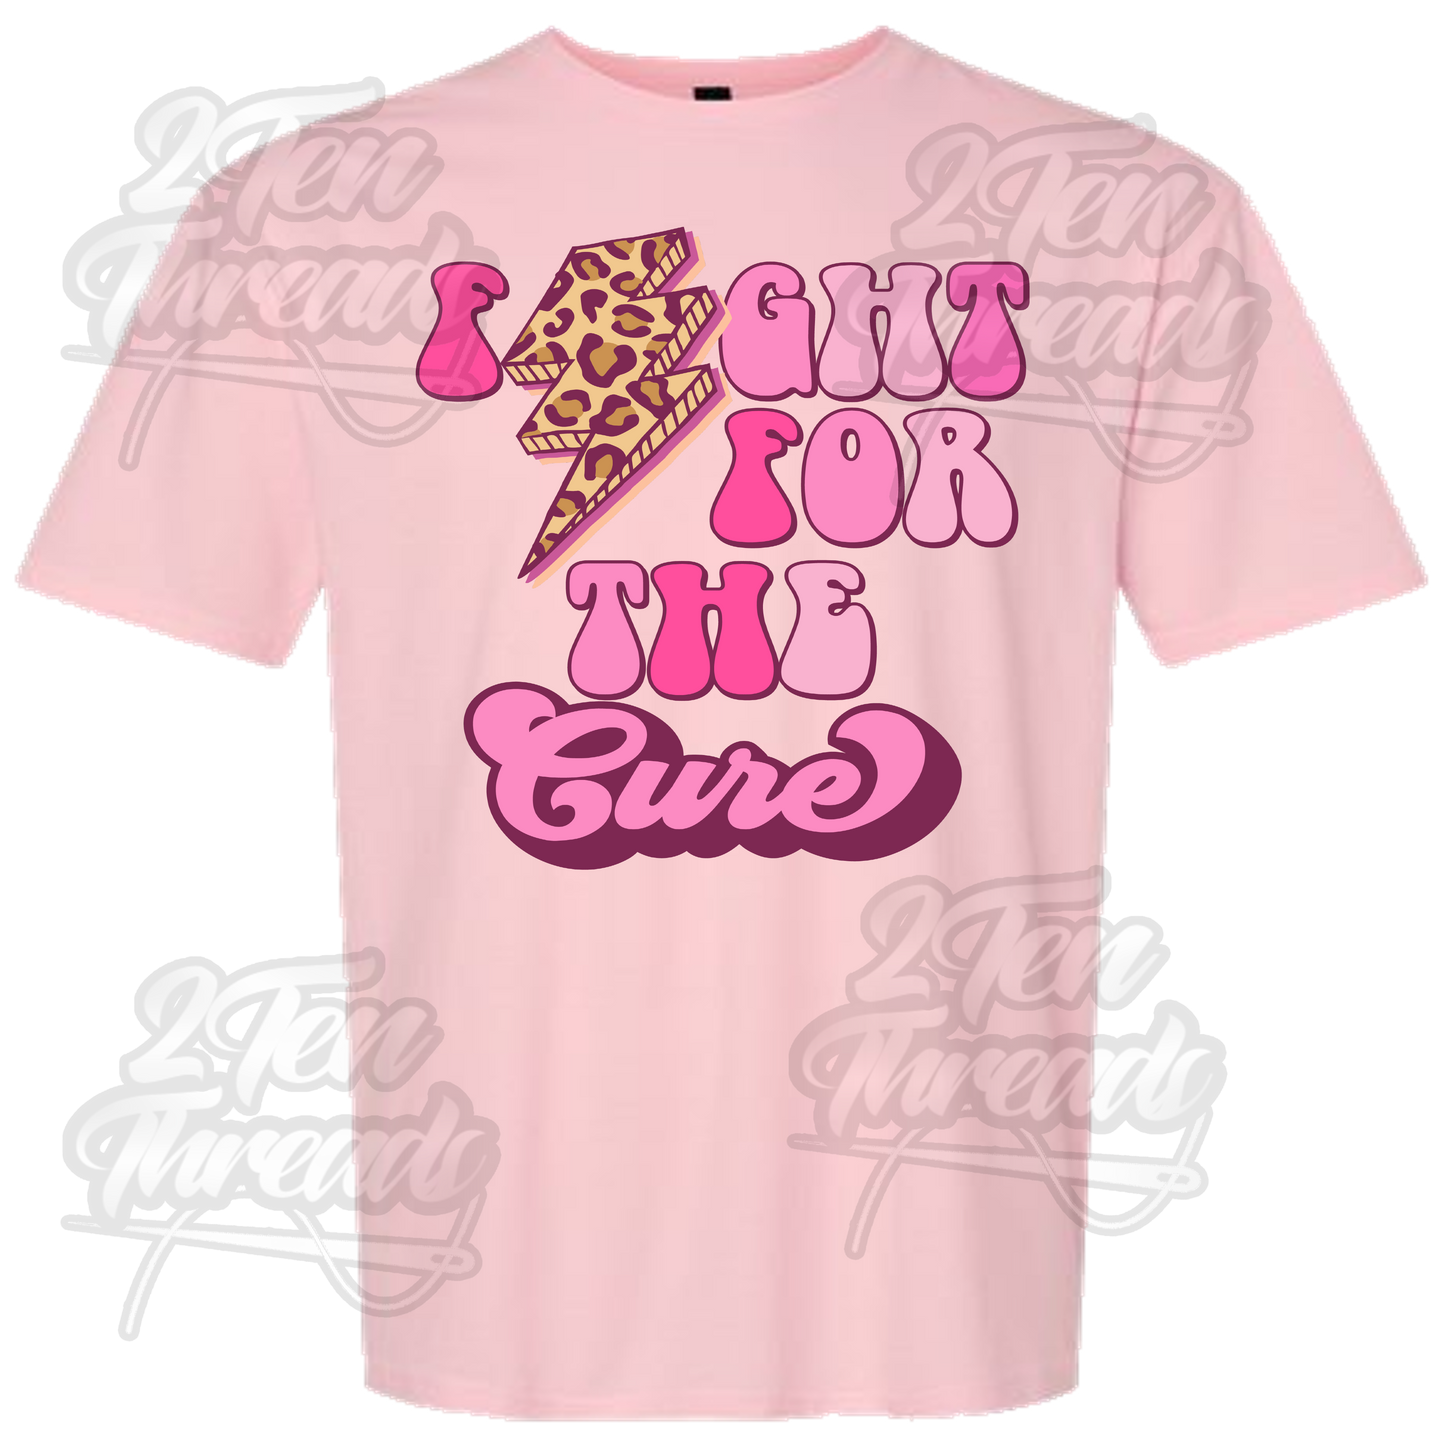 Fight for the Cure Shirt